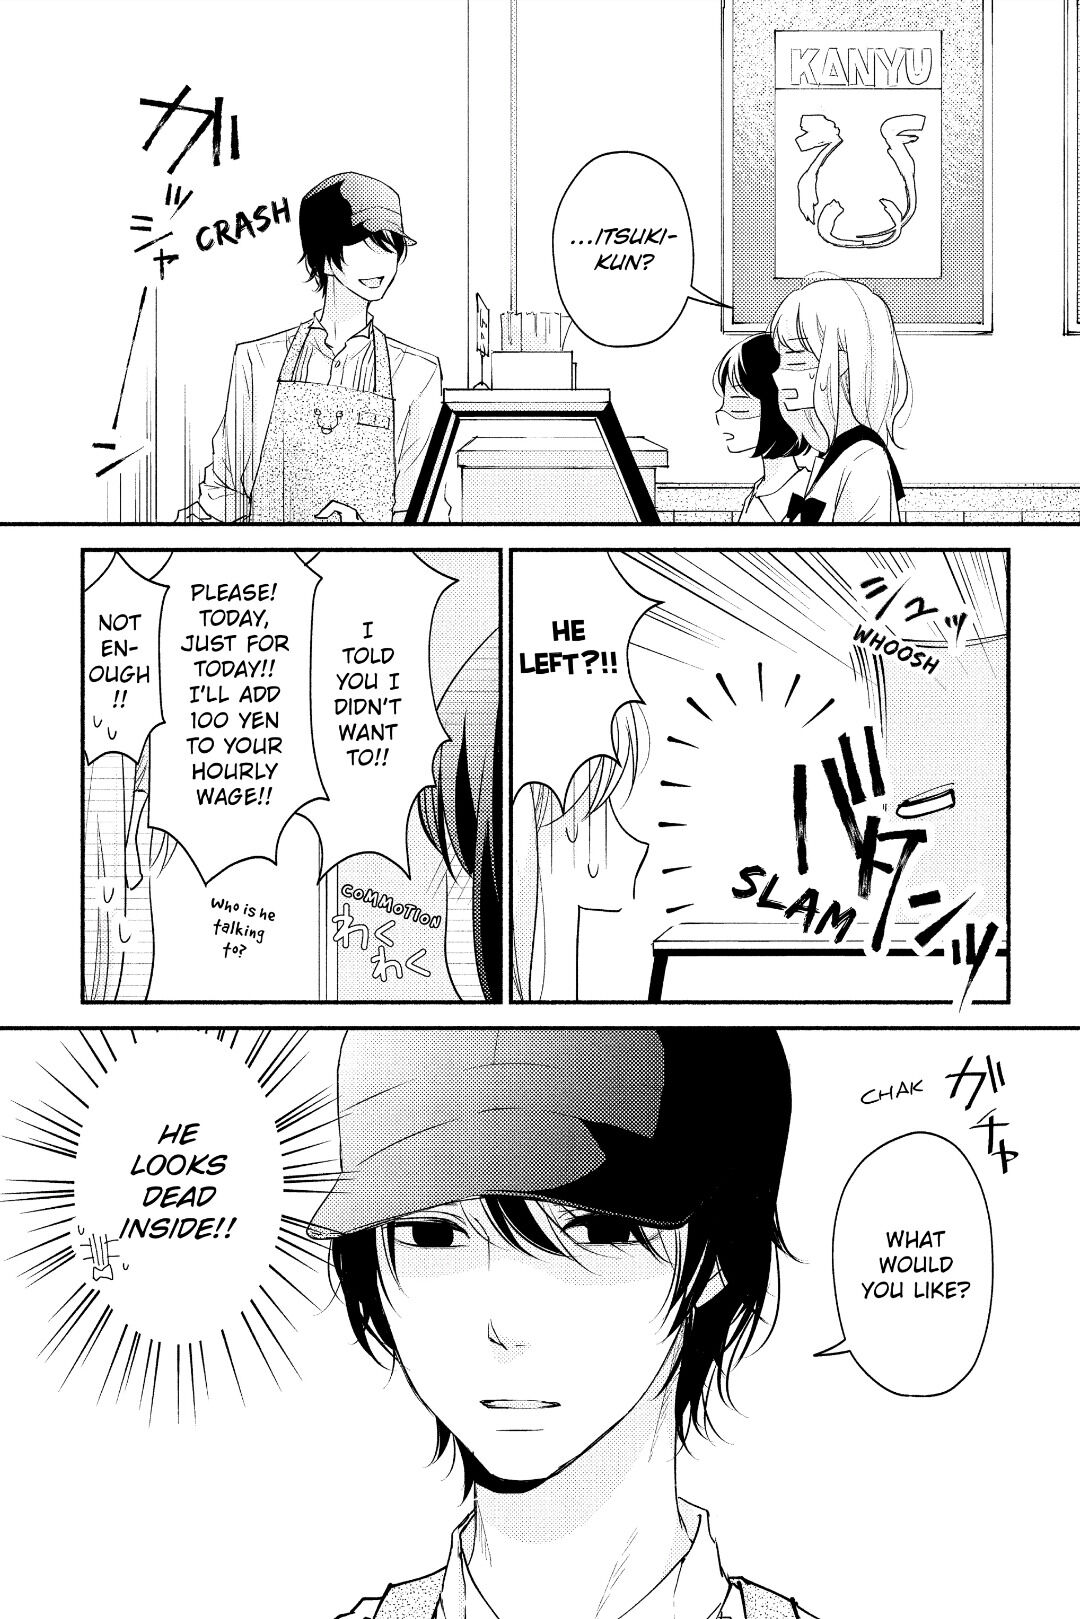 A Kiss, For Real - chapter 4 - #4